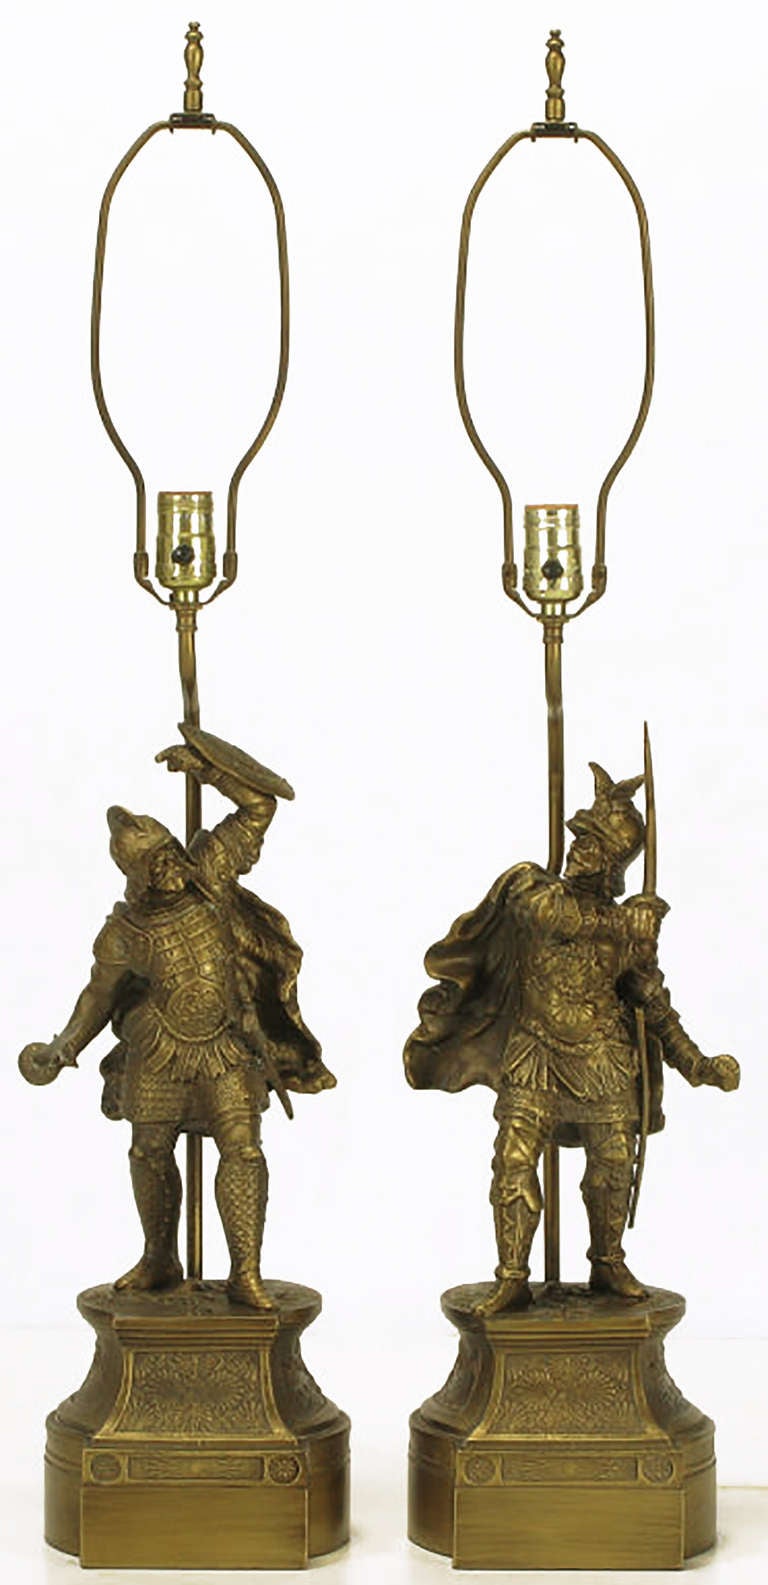 Unexpected pair of cast brass statuettes in the form of Spanish Conquistadors on brass pedestals. Animated forms, with swords, shields and flowing capes. Sold sans shades.